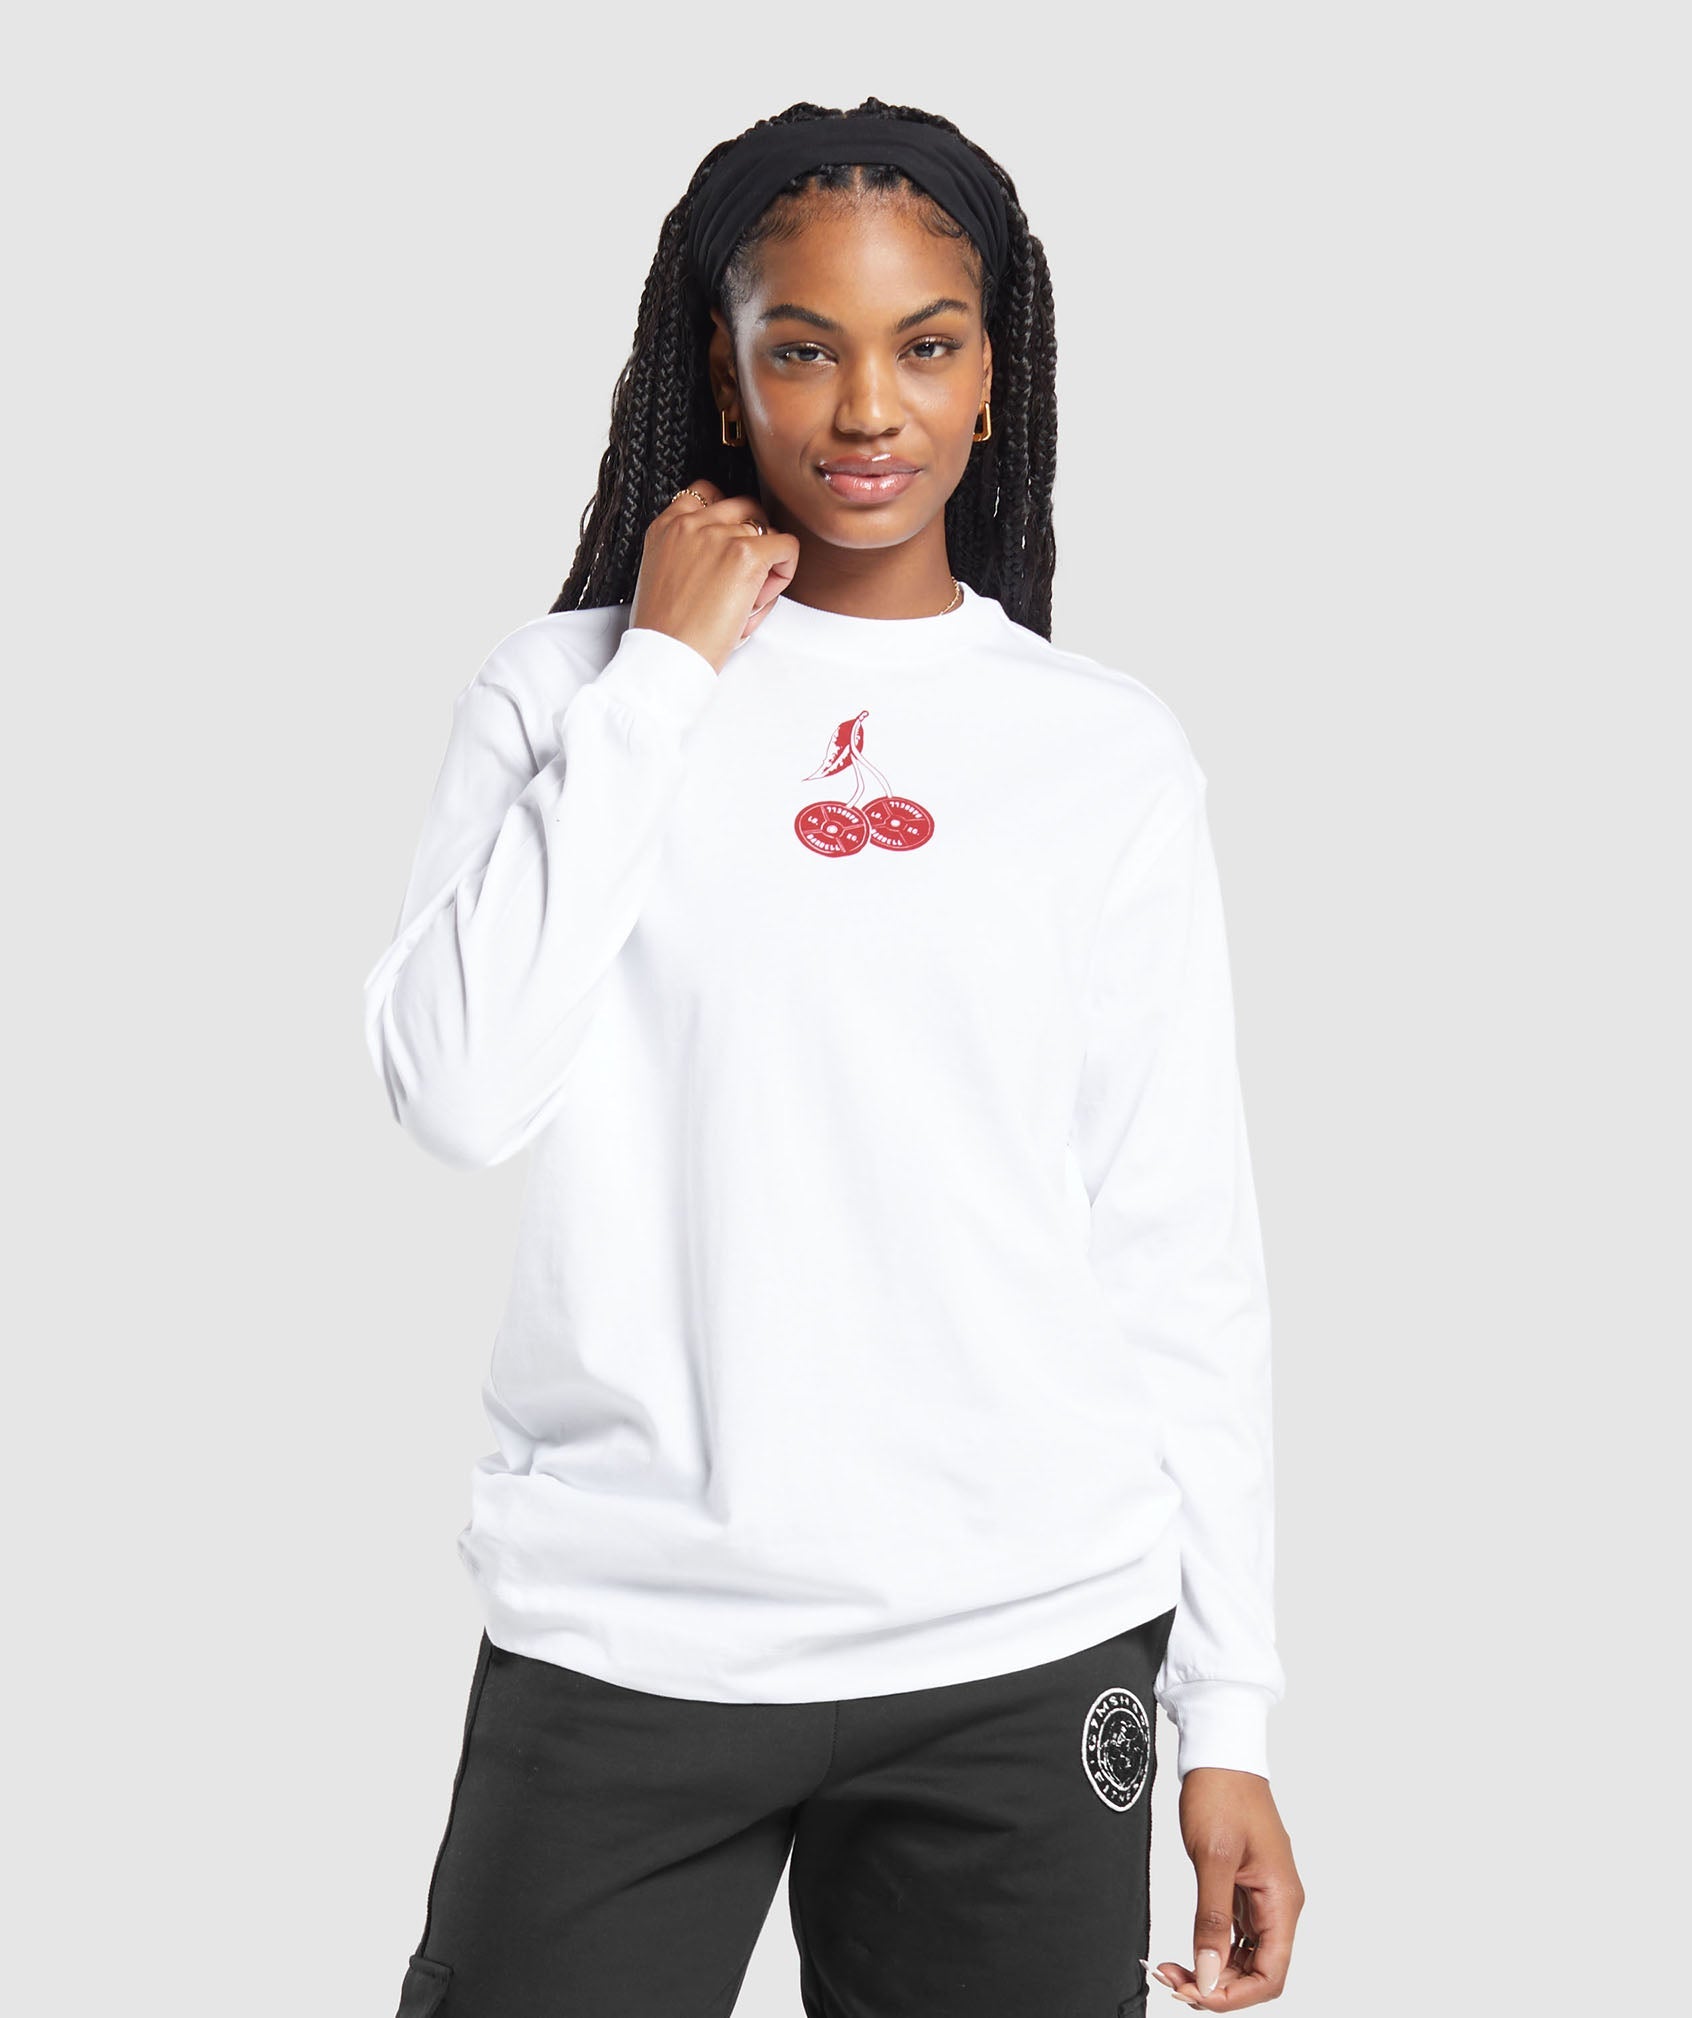 Barbell Cherries Long Sleeve Top in White - view 6